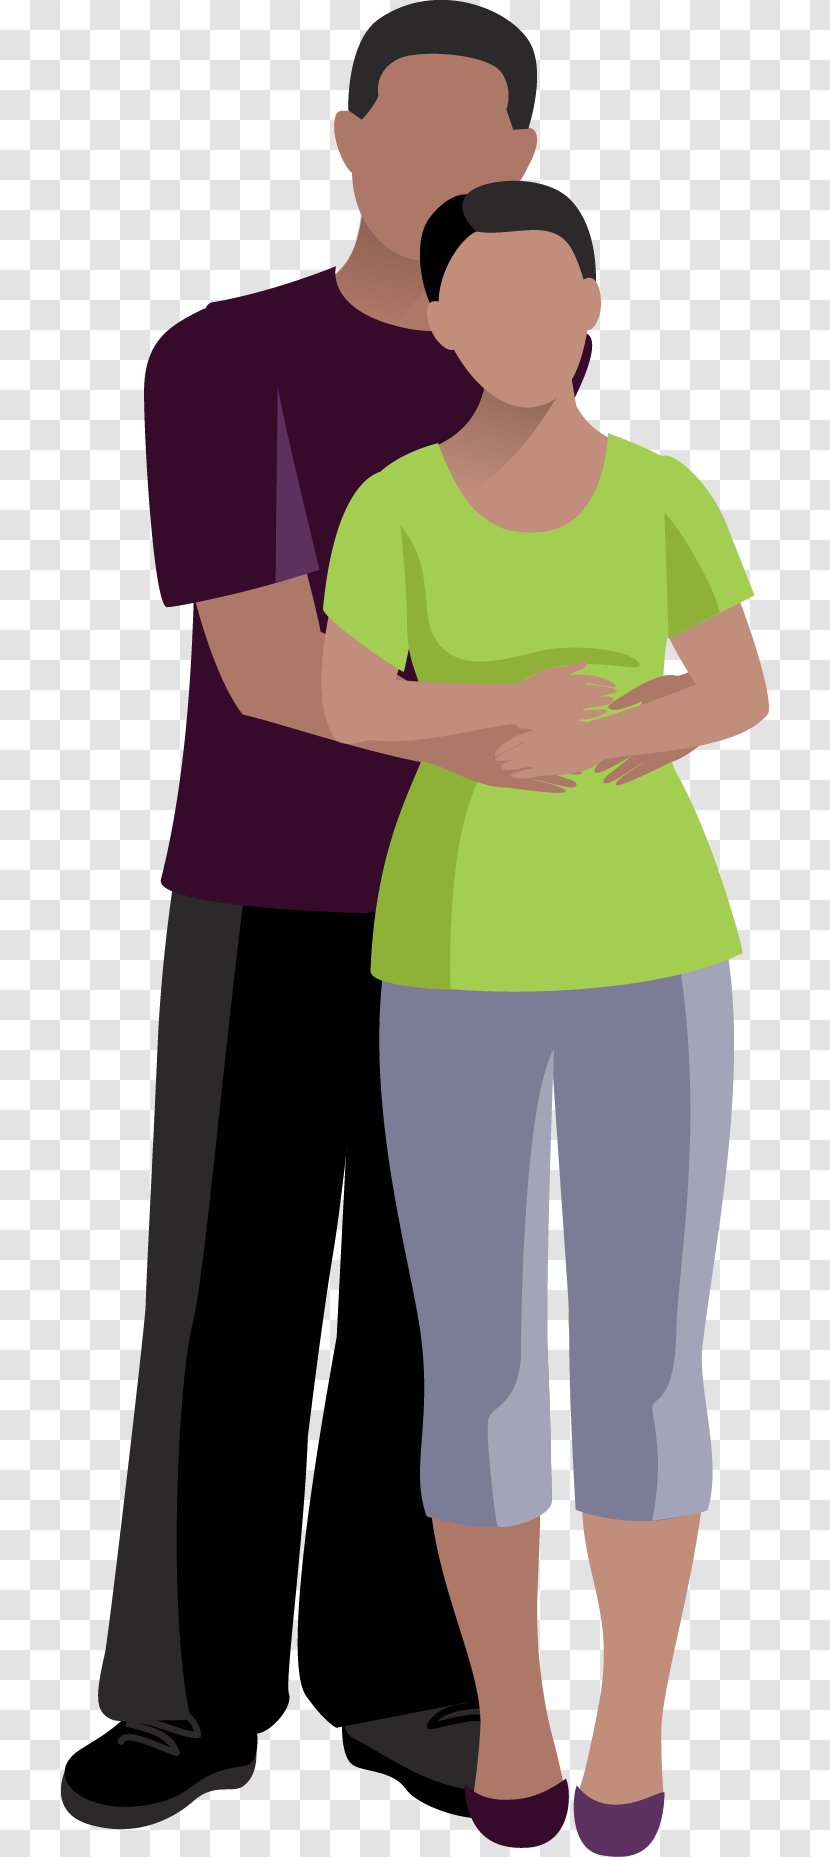 Significant Other Cartoon - Frame - Couple Transparent PNG